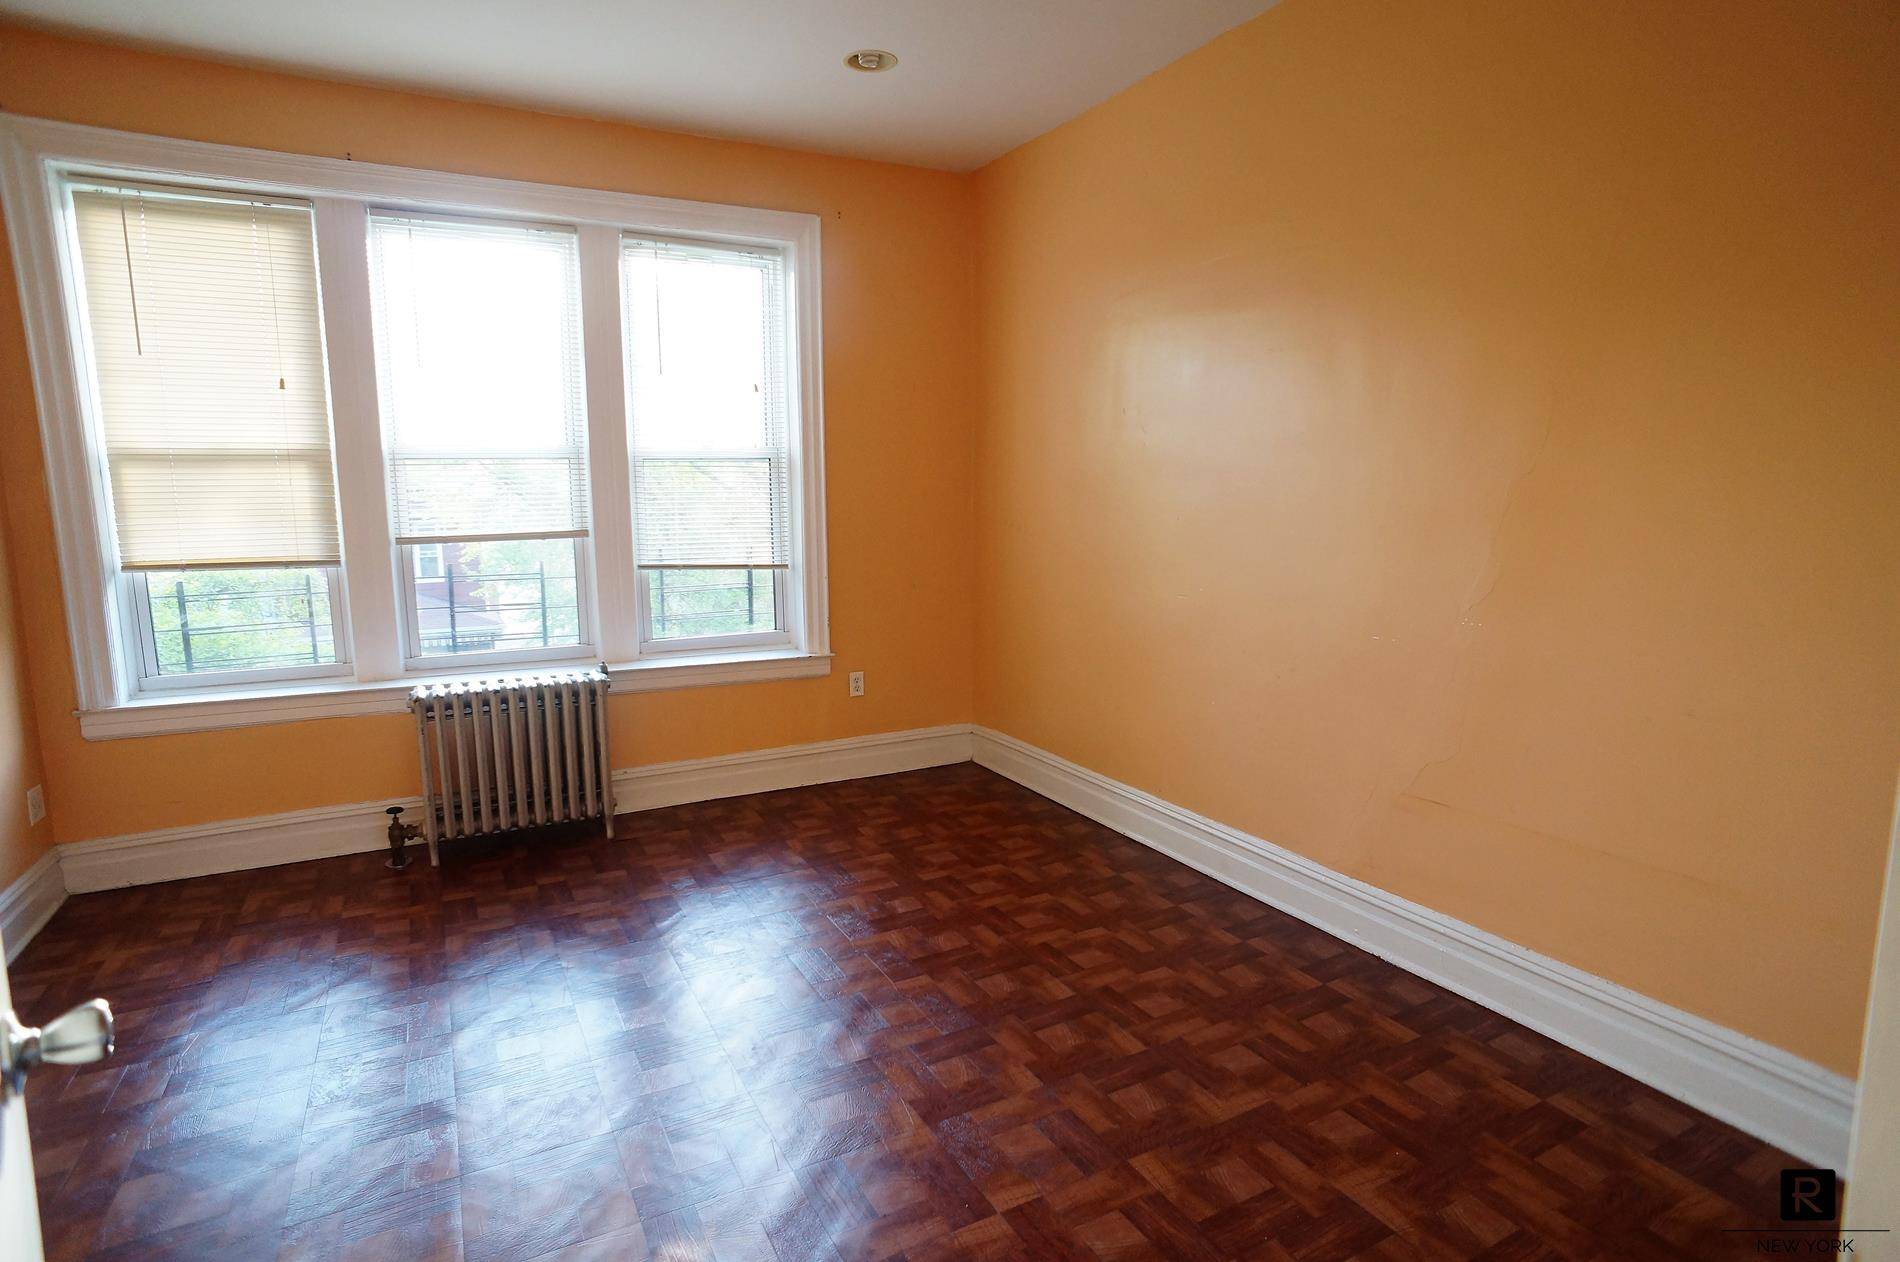 Spacious, Completely Sun Drenched 3BR Office Convertible 4 Bedroom in Prime Bensonhurst Gravesend !